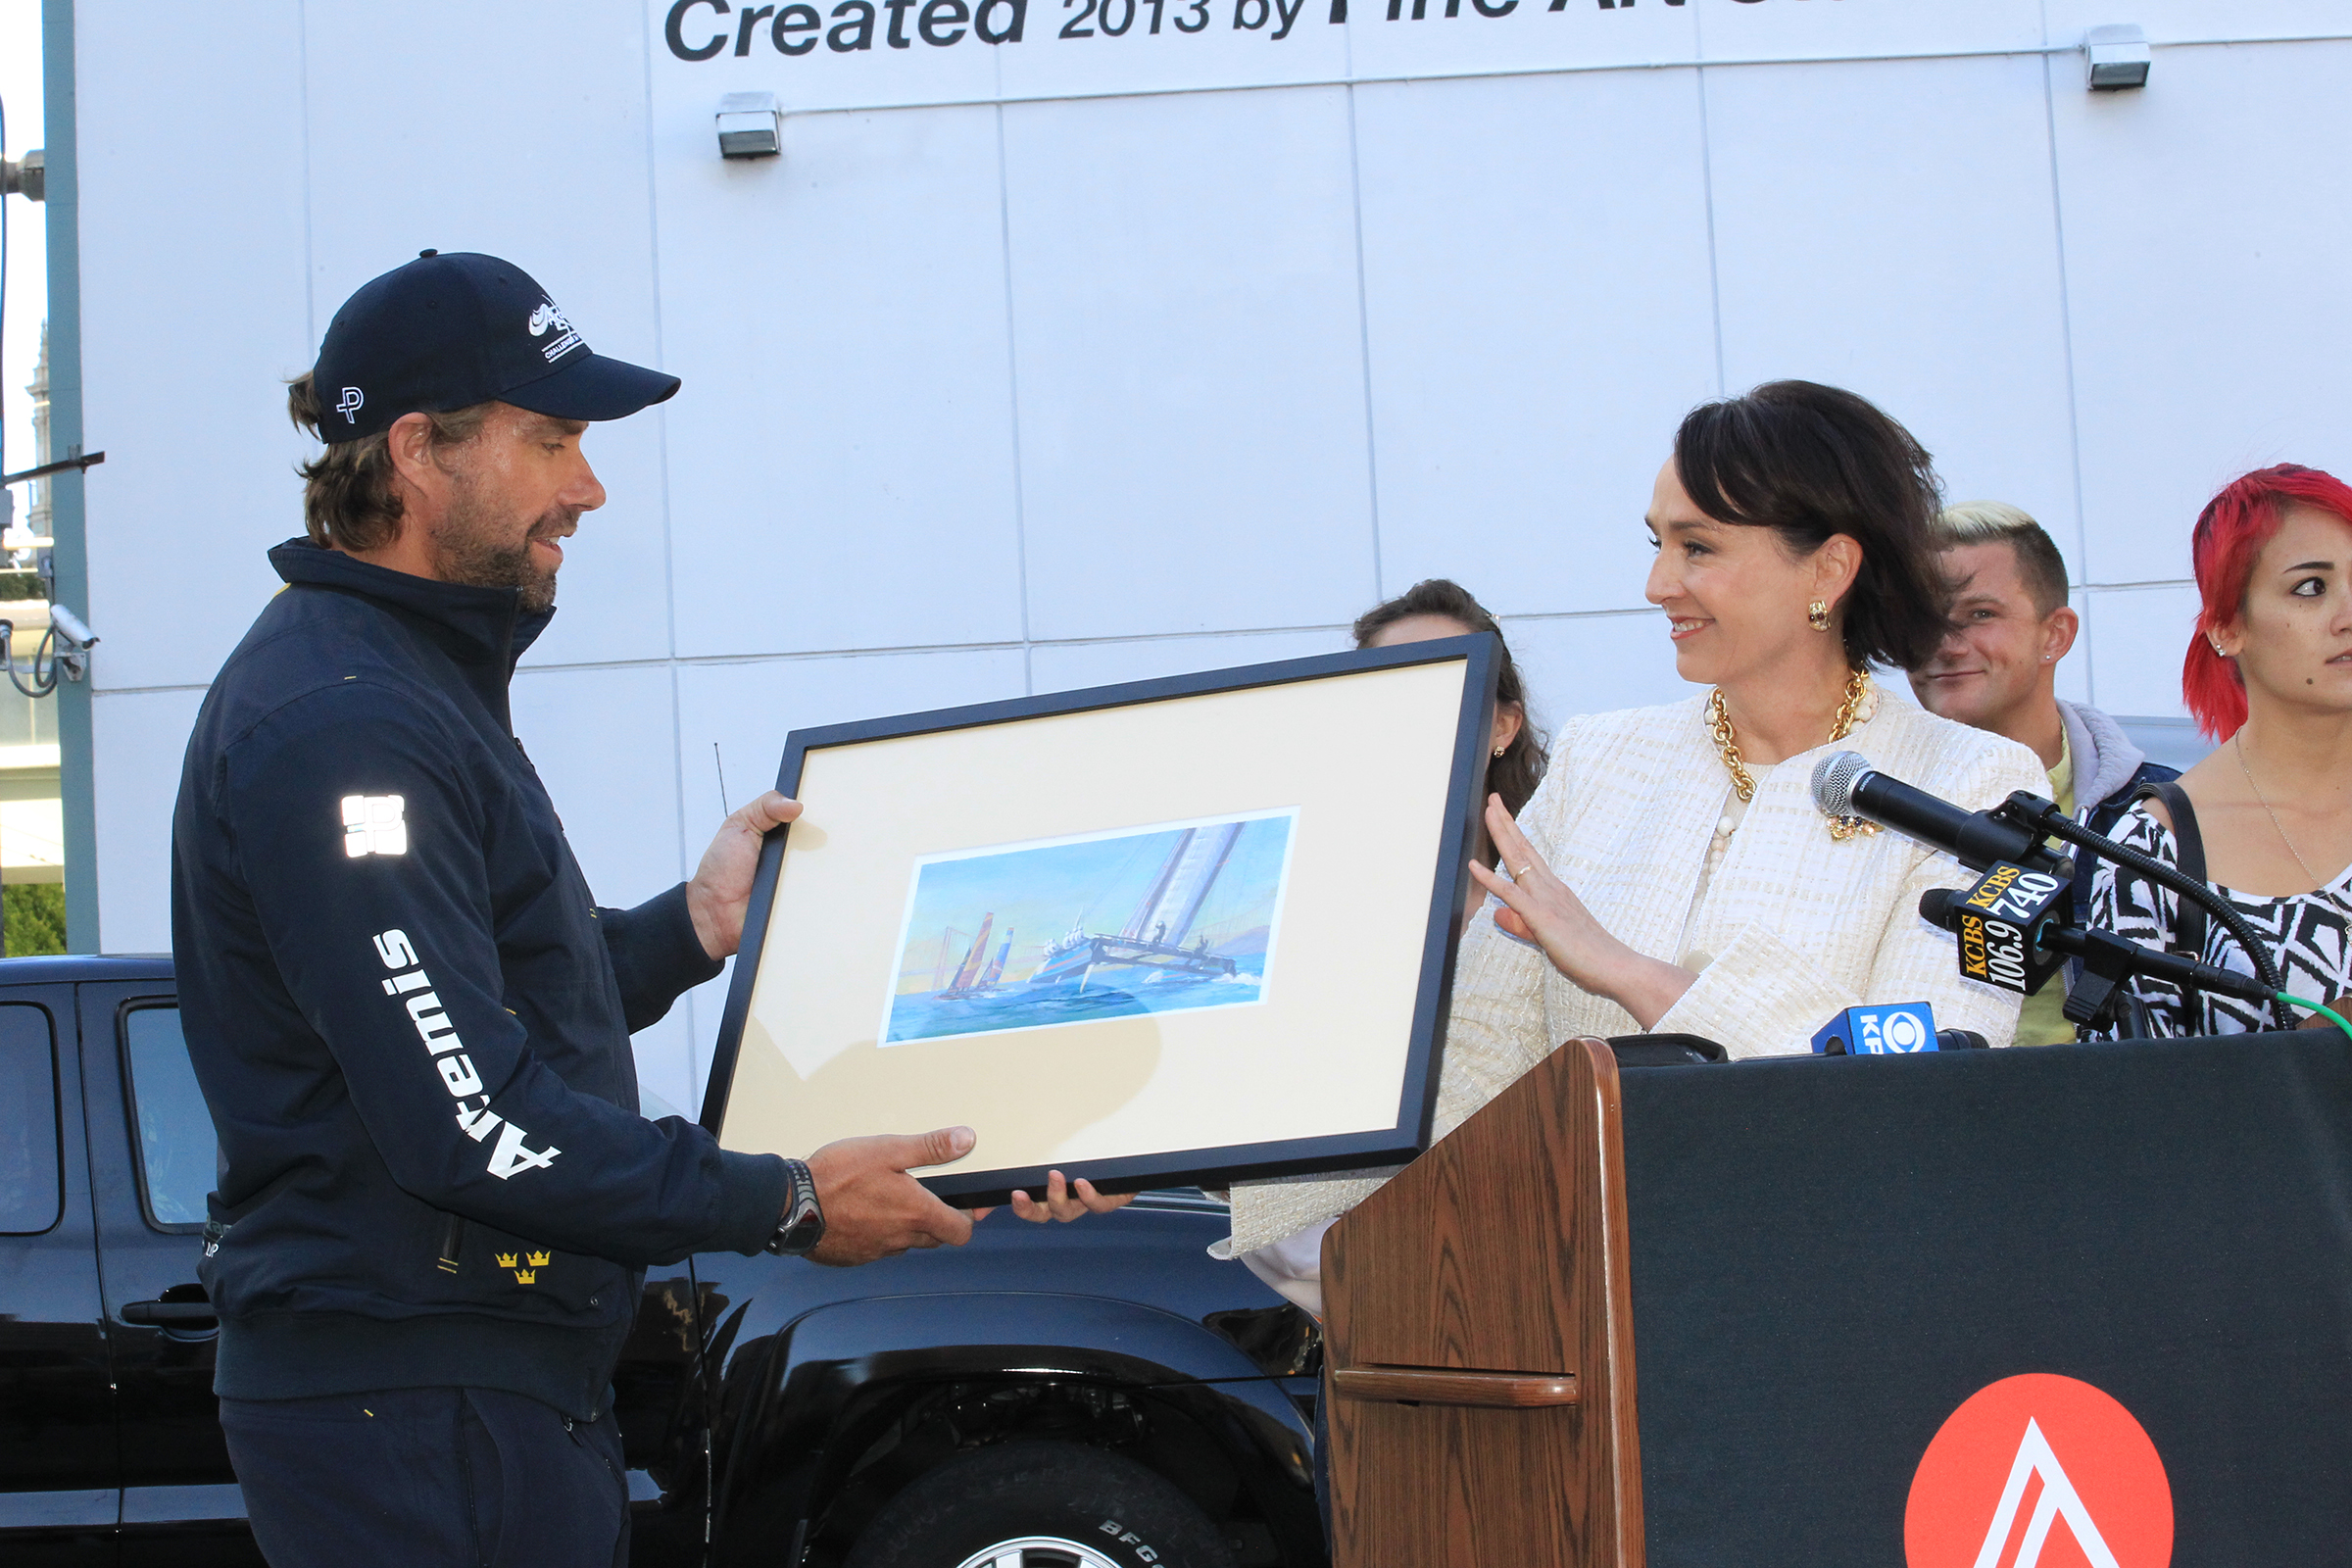 Dr. Elisa Stephens, President of the Academy of Art University, presenting Iain Percy, Skipper & Tactician of the Artemis Racing Team a smaller version of the America’s Cup Mural as a gift to the fami